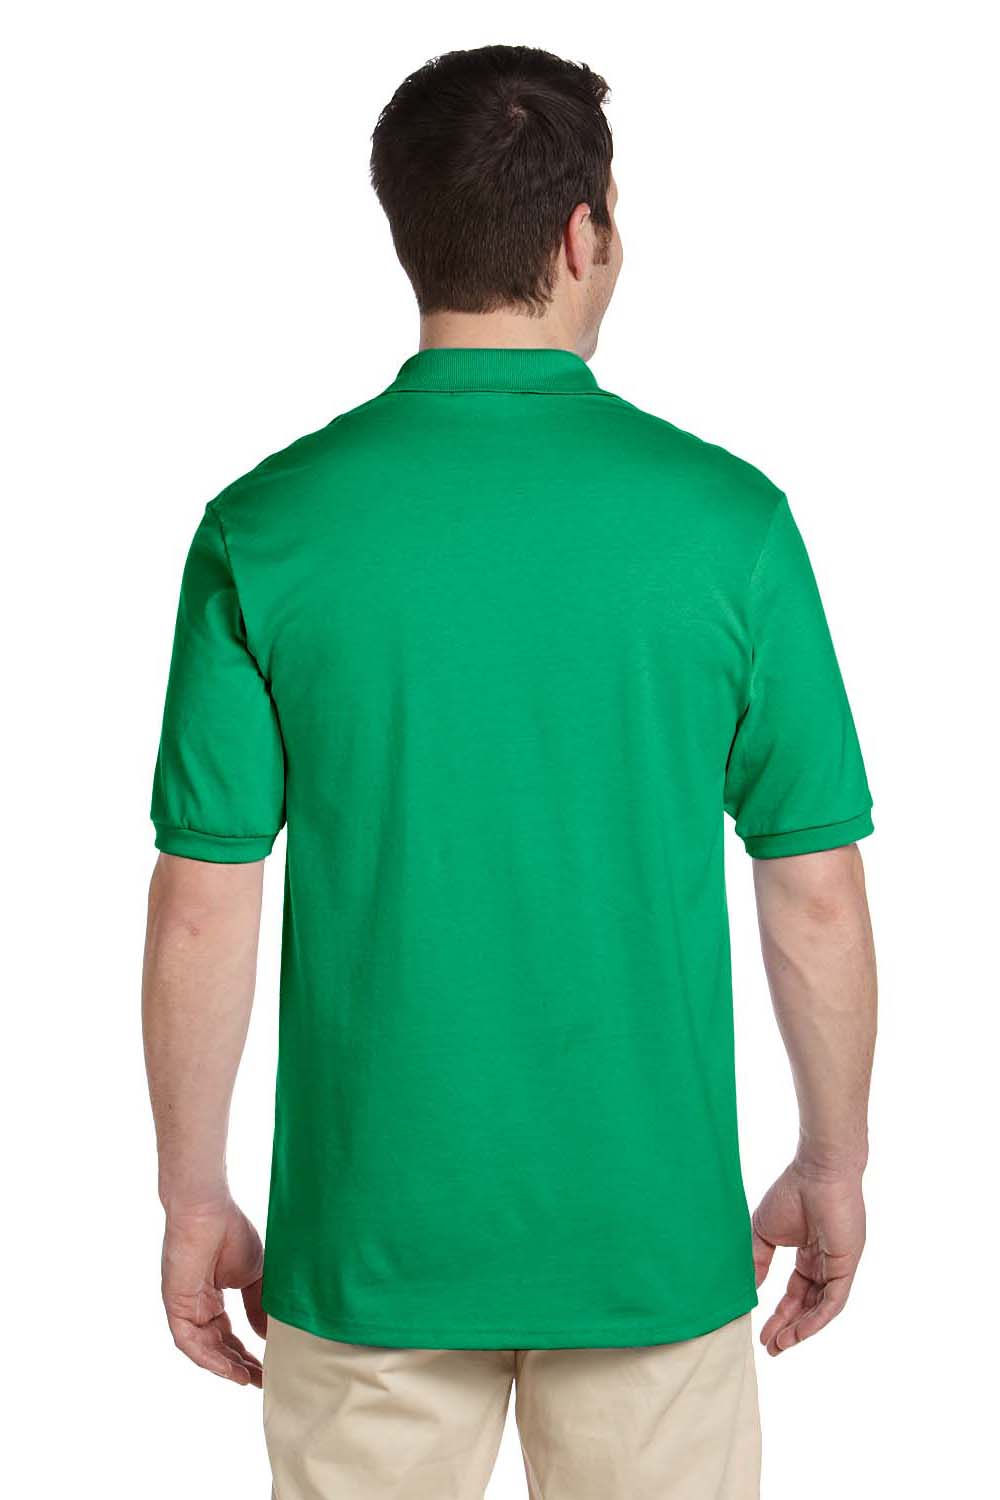 Jerzees 437 Mens SpotShield Stain Resistant Short Sleeve Polo Shirt Kelly Green Back